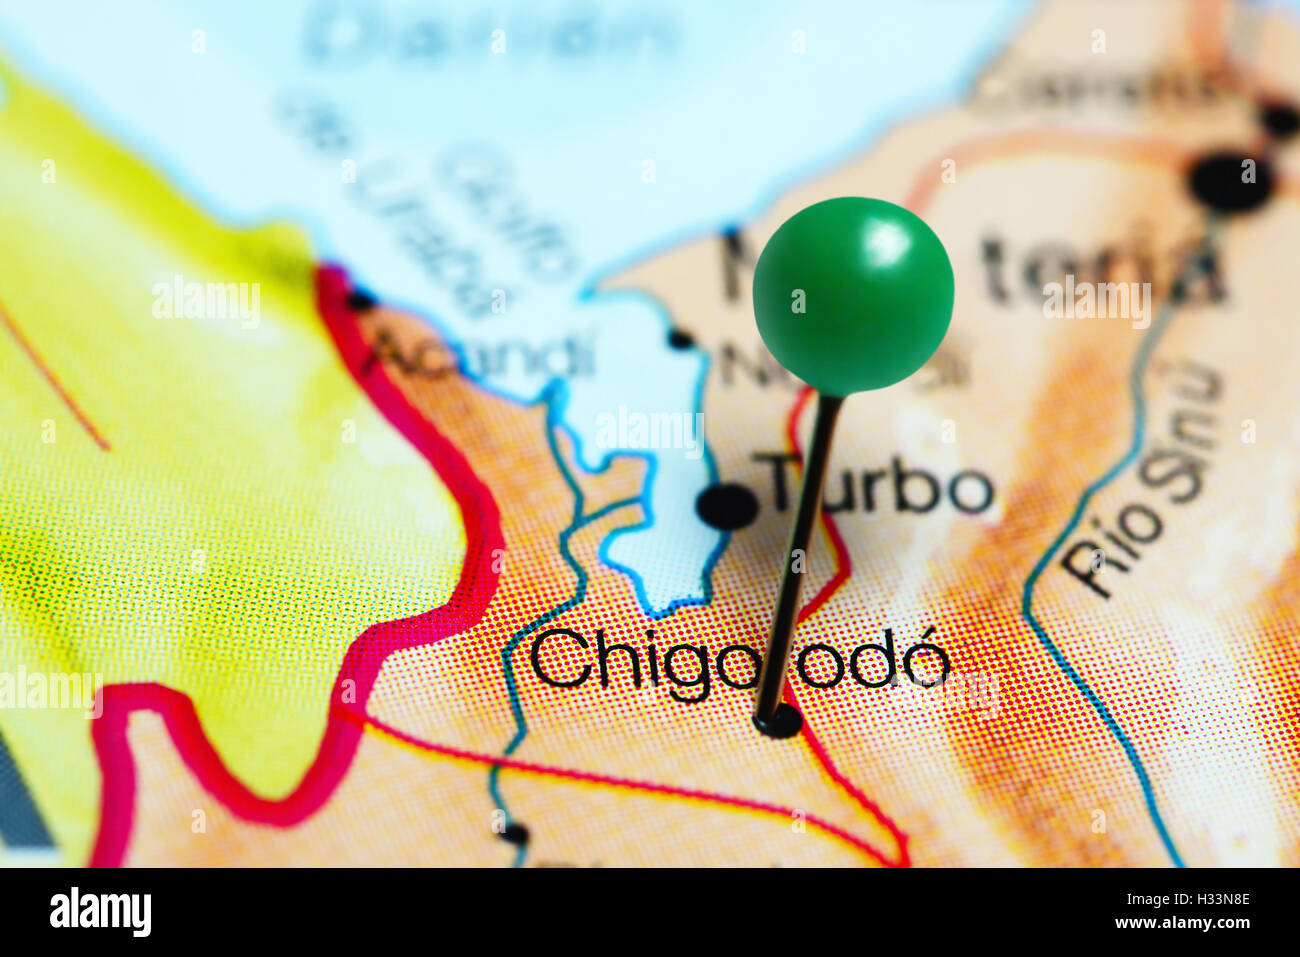 Chigorodo pinned on a map of Colombia Stock Photo